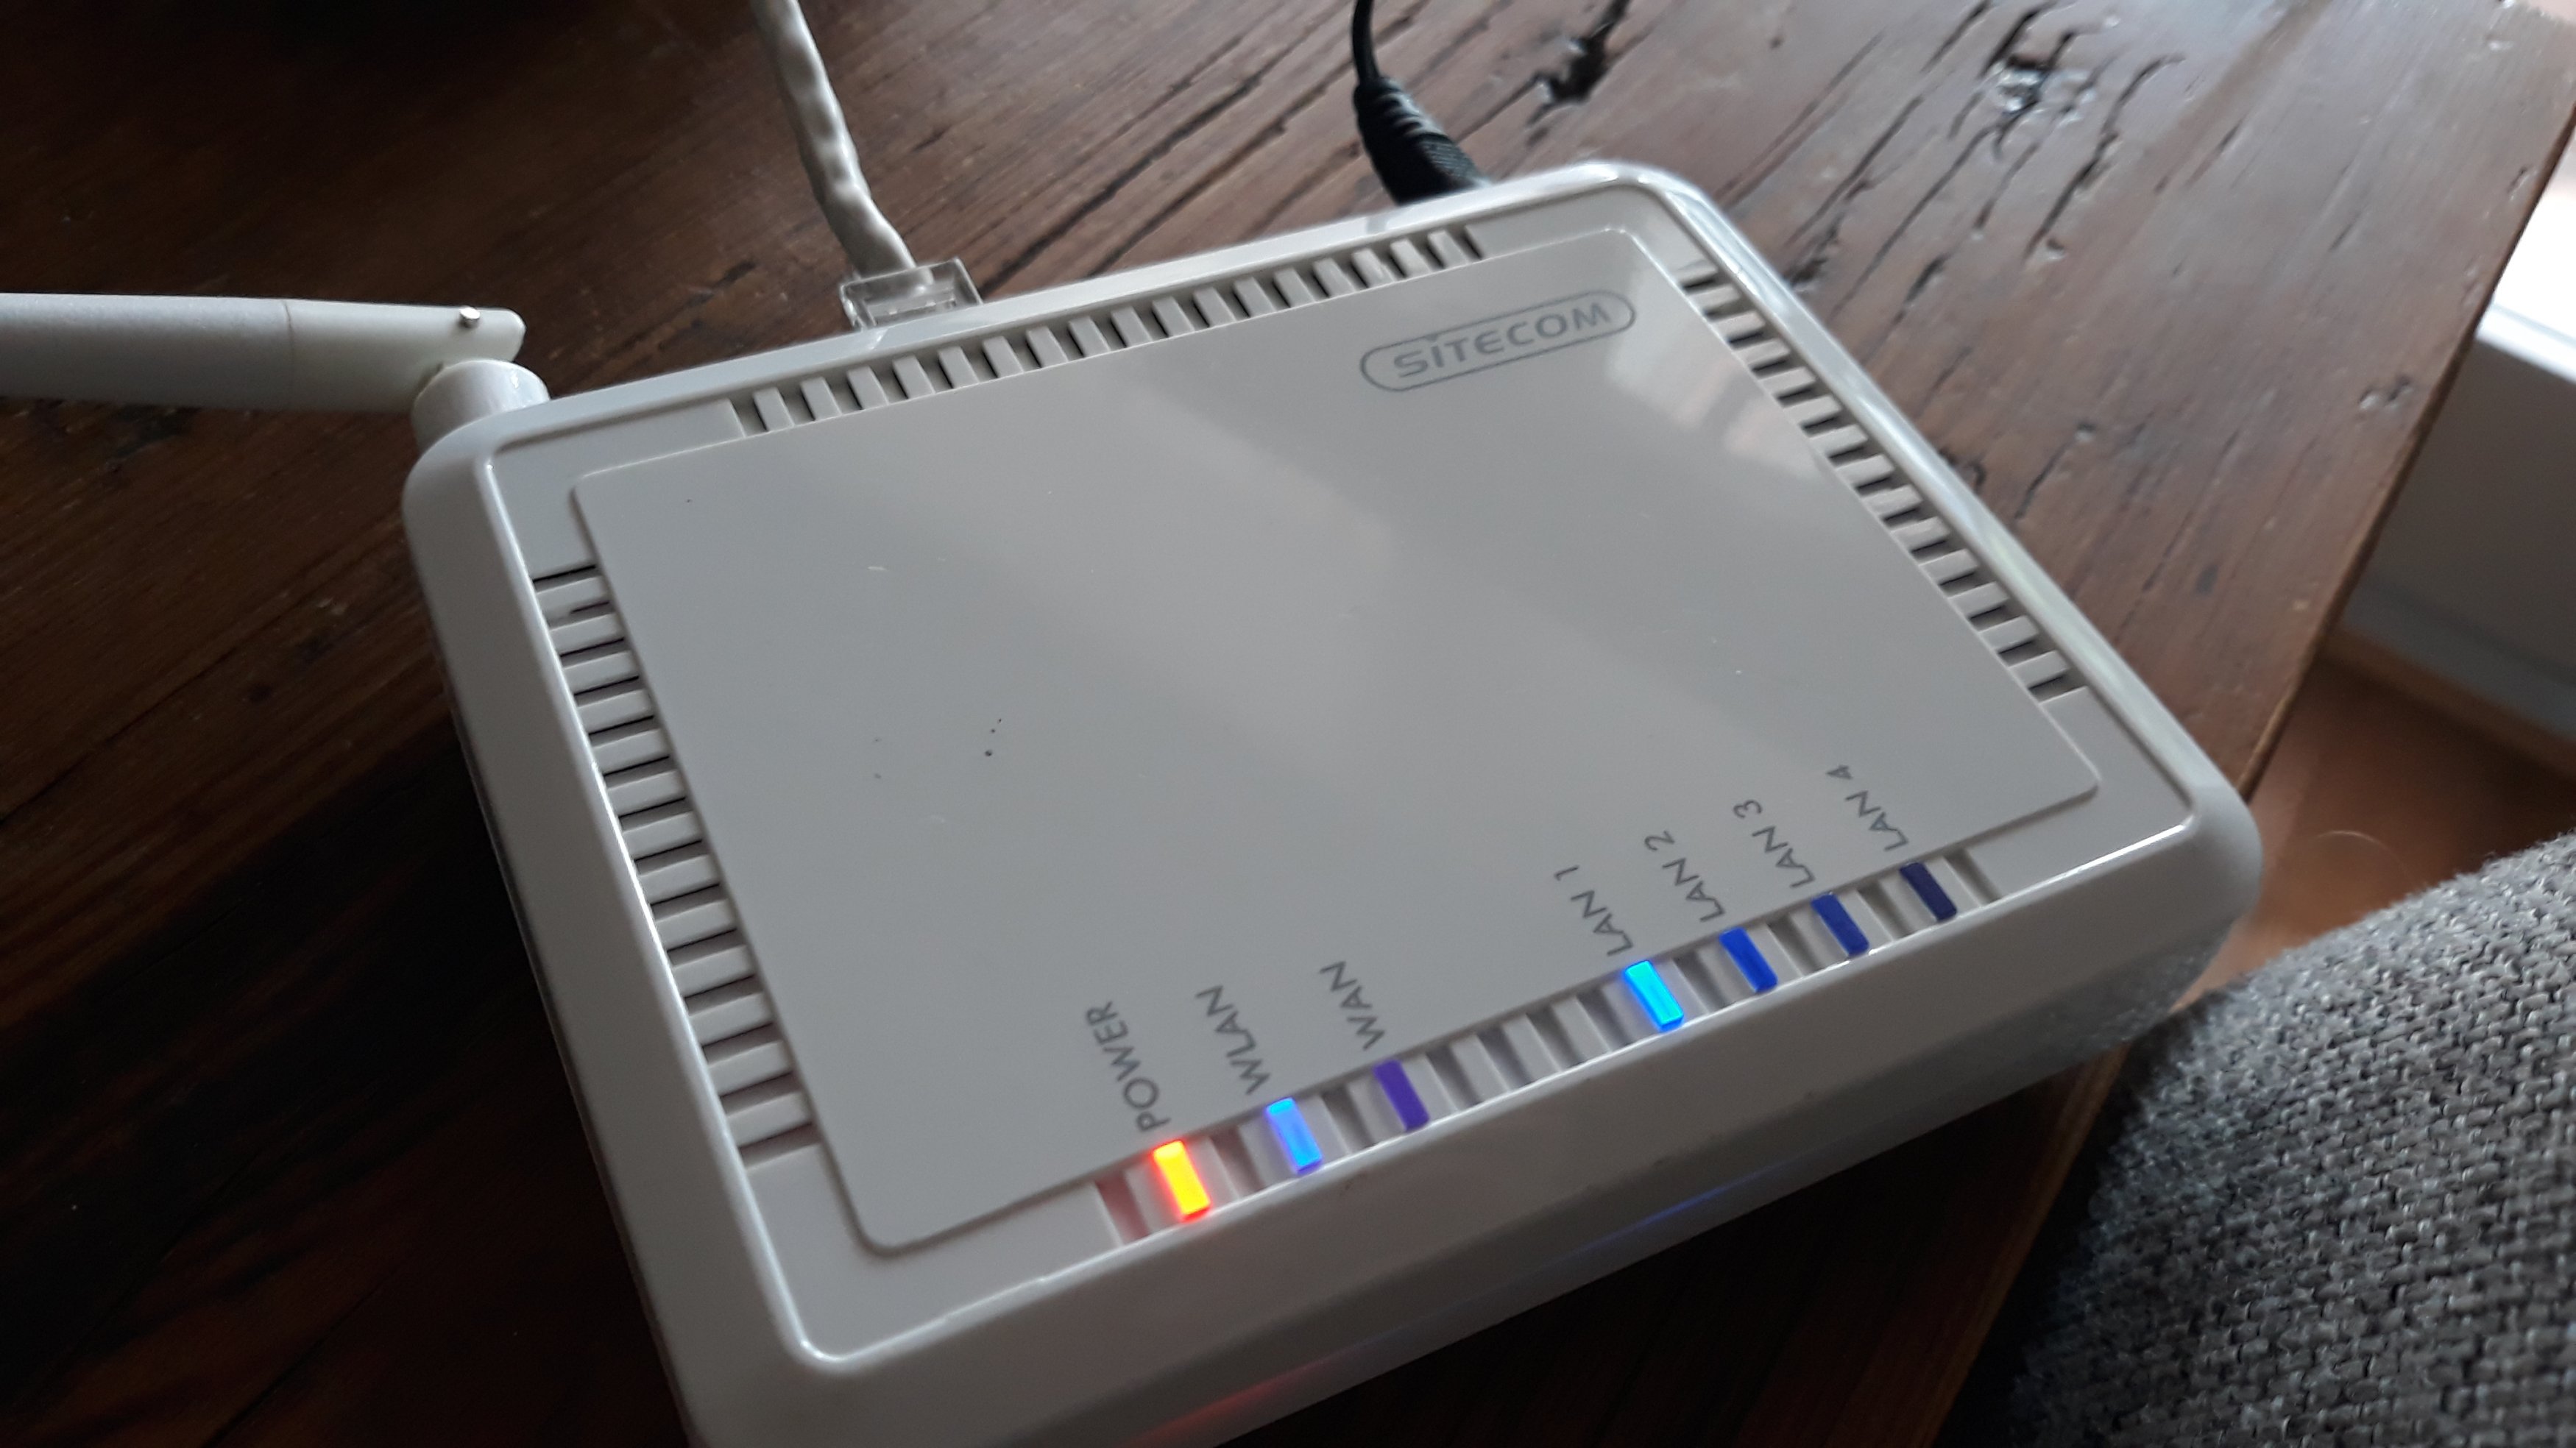 Issue with this specific Sitecom Broadband Router, doesn't want to work at  all | GBAtemp.net - The Independent Video Game Community